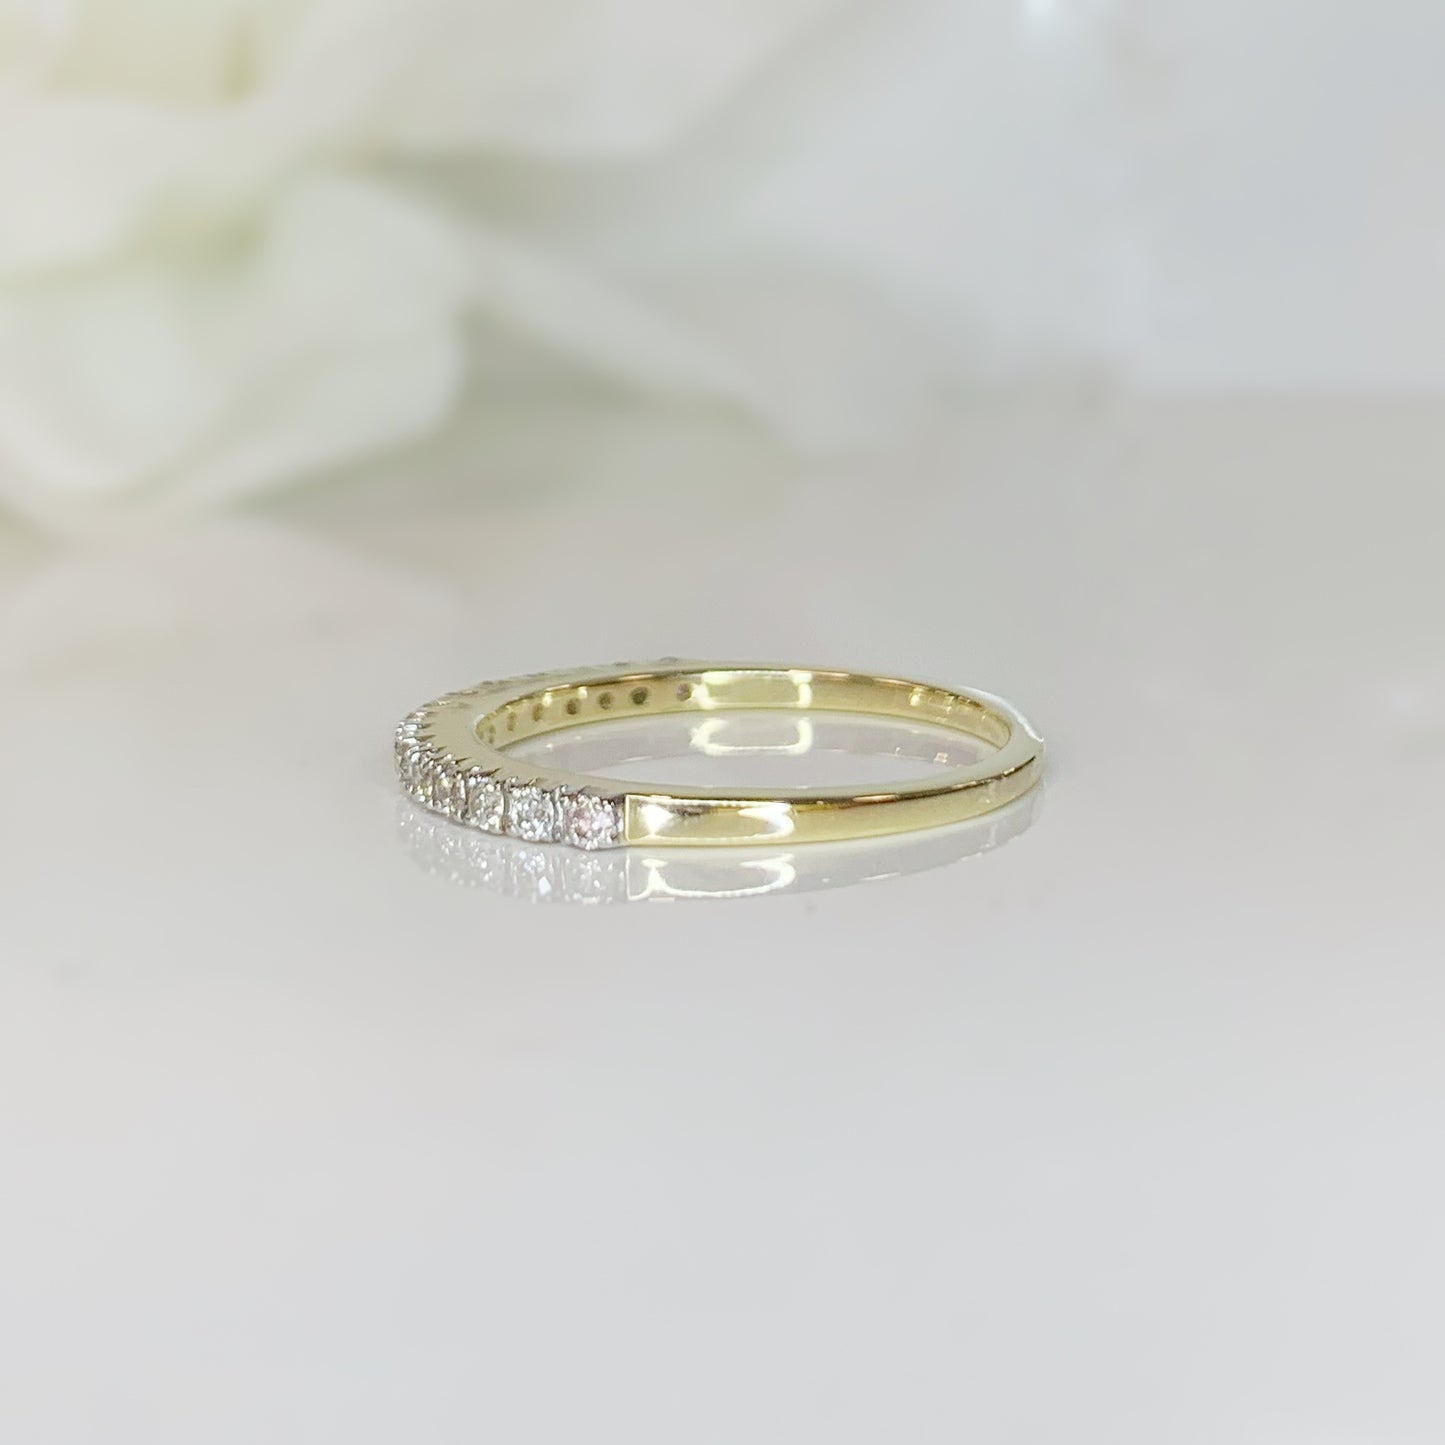 Modern 9ct Yellow Gold And Diamond Half Eternity Ring - SIZE L 1/2